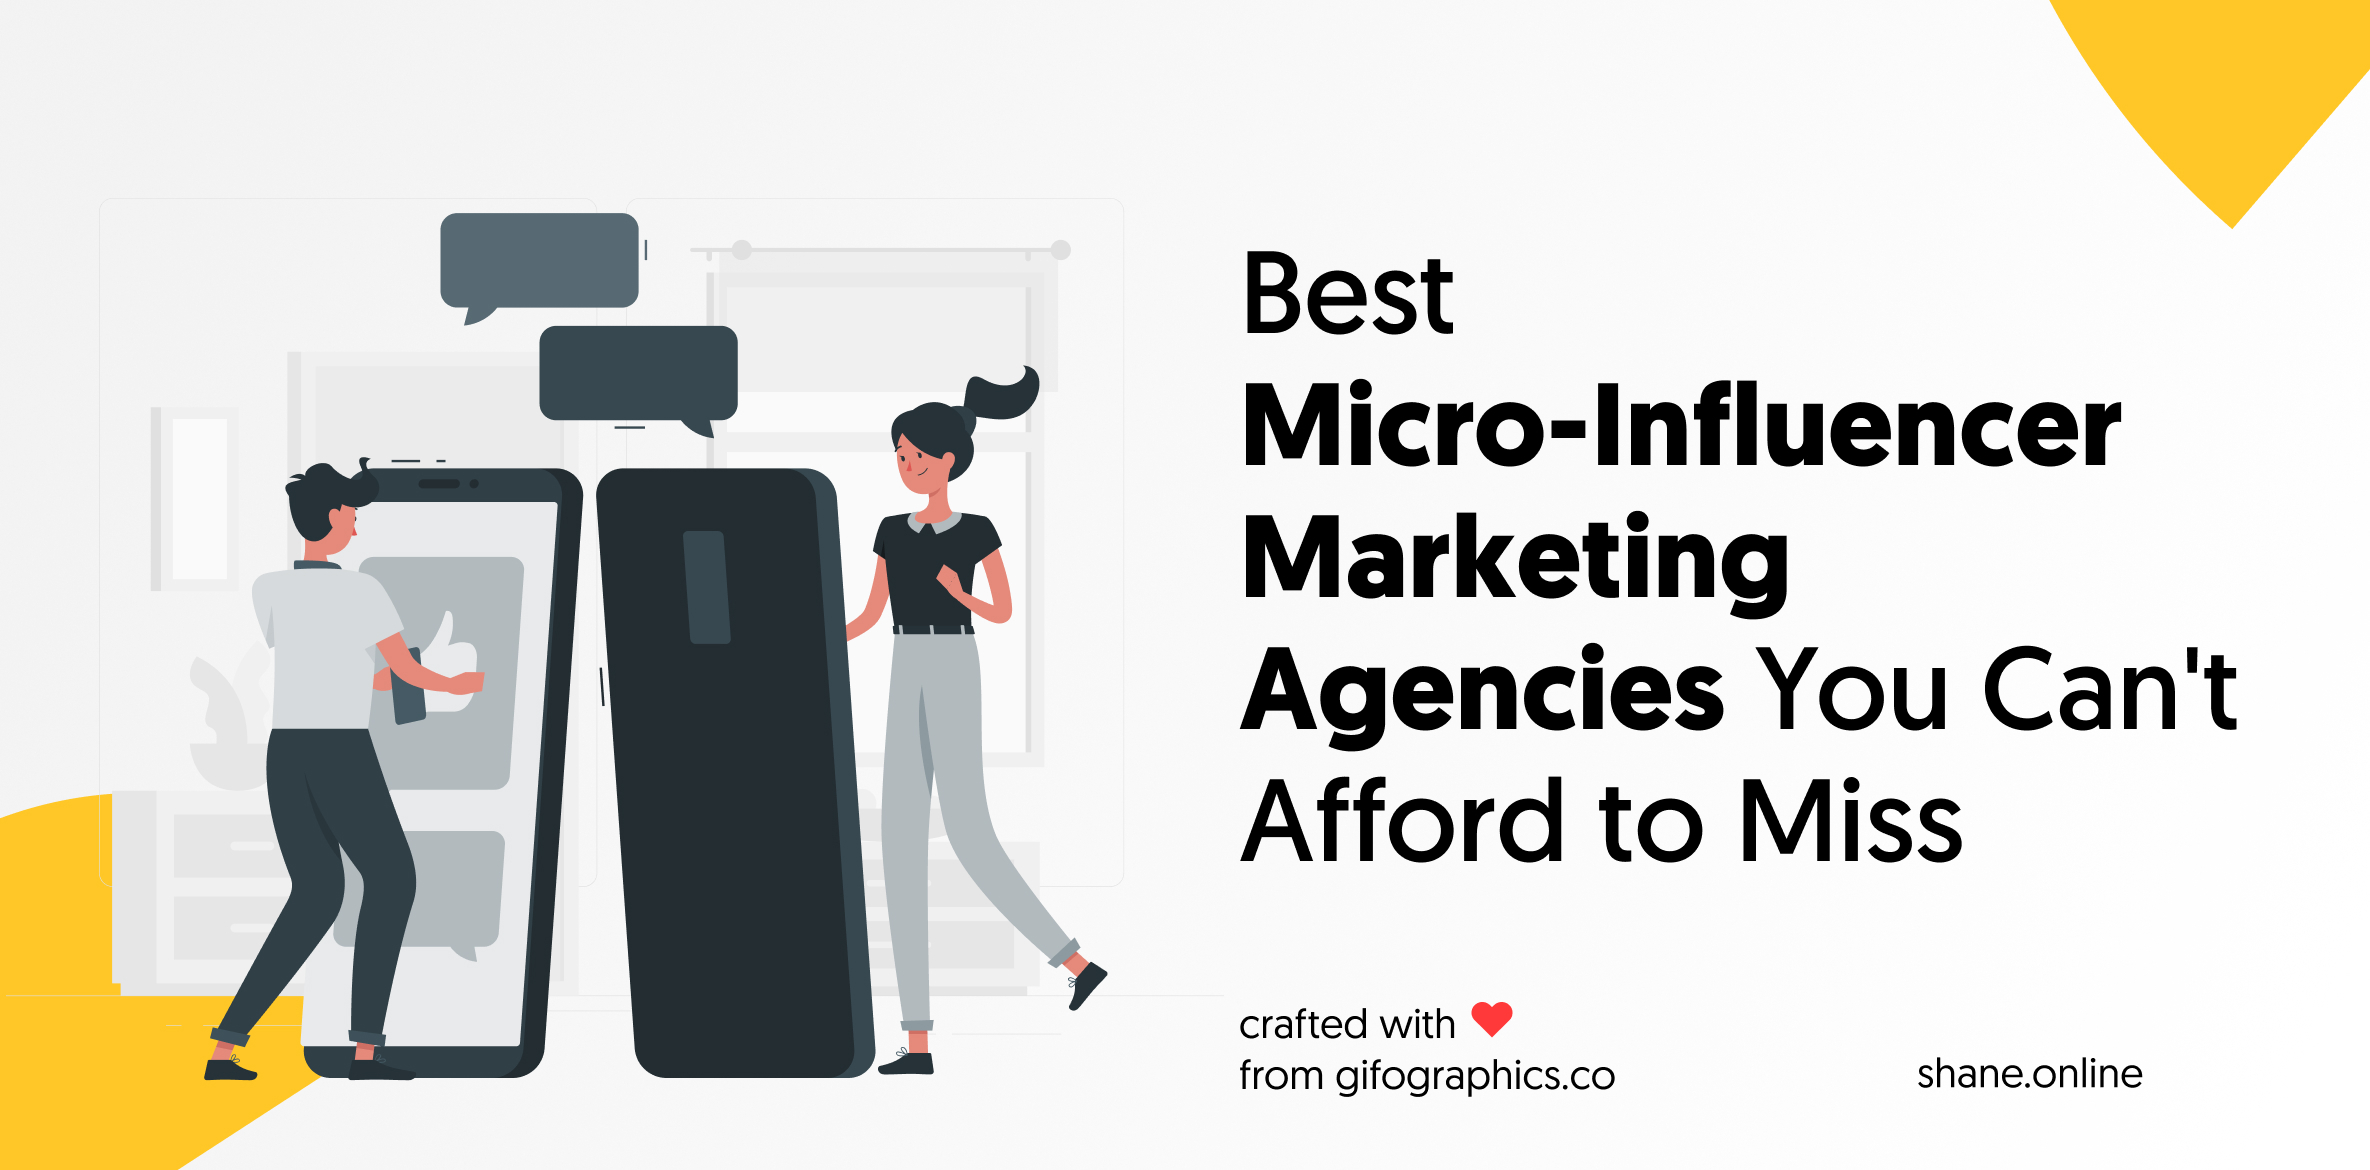 9 Micro-Influencer Marketing Agencies You Can't Afford to Miss